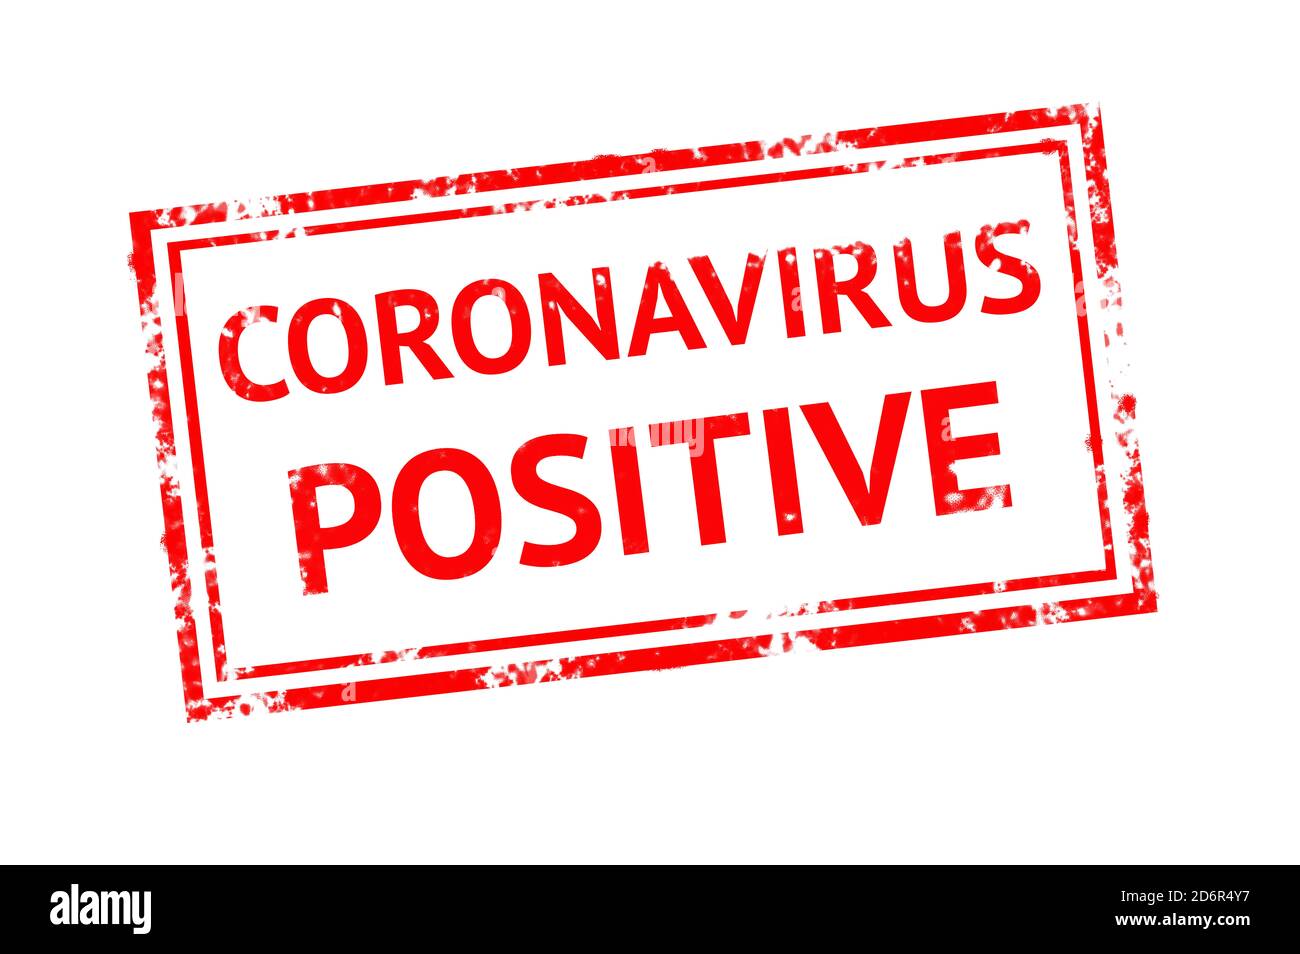 CORONAVIRUS POSITIVE text by red rubber stamp, concept picture Stock Photo